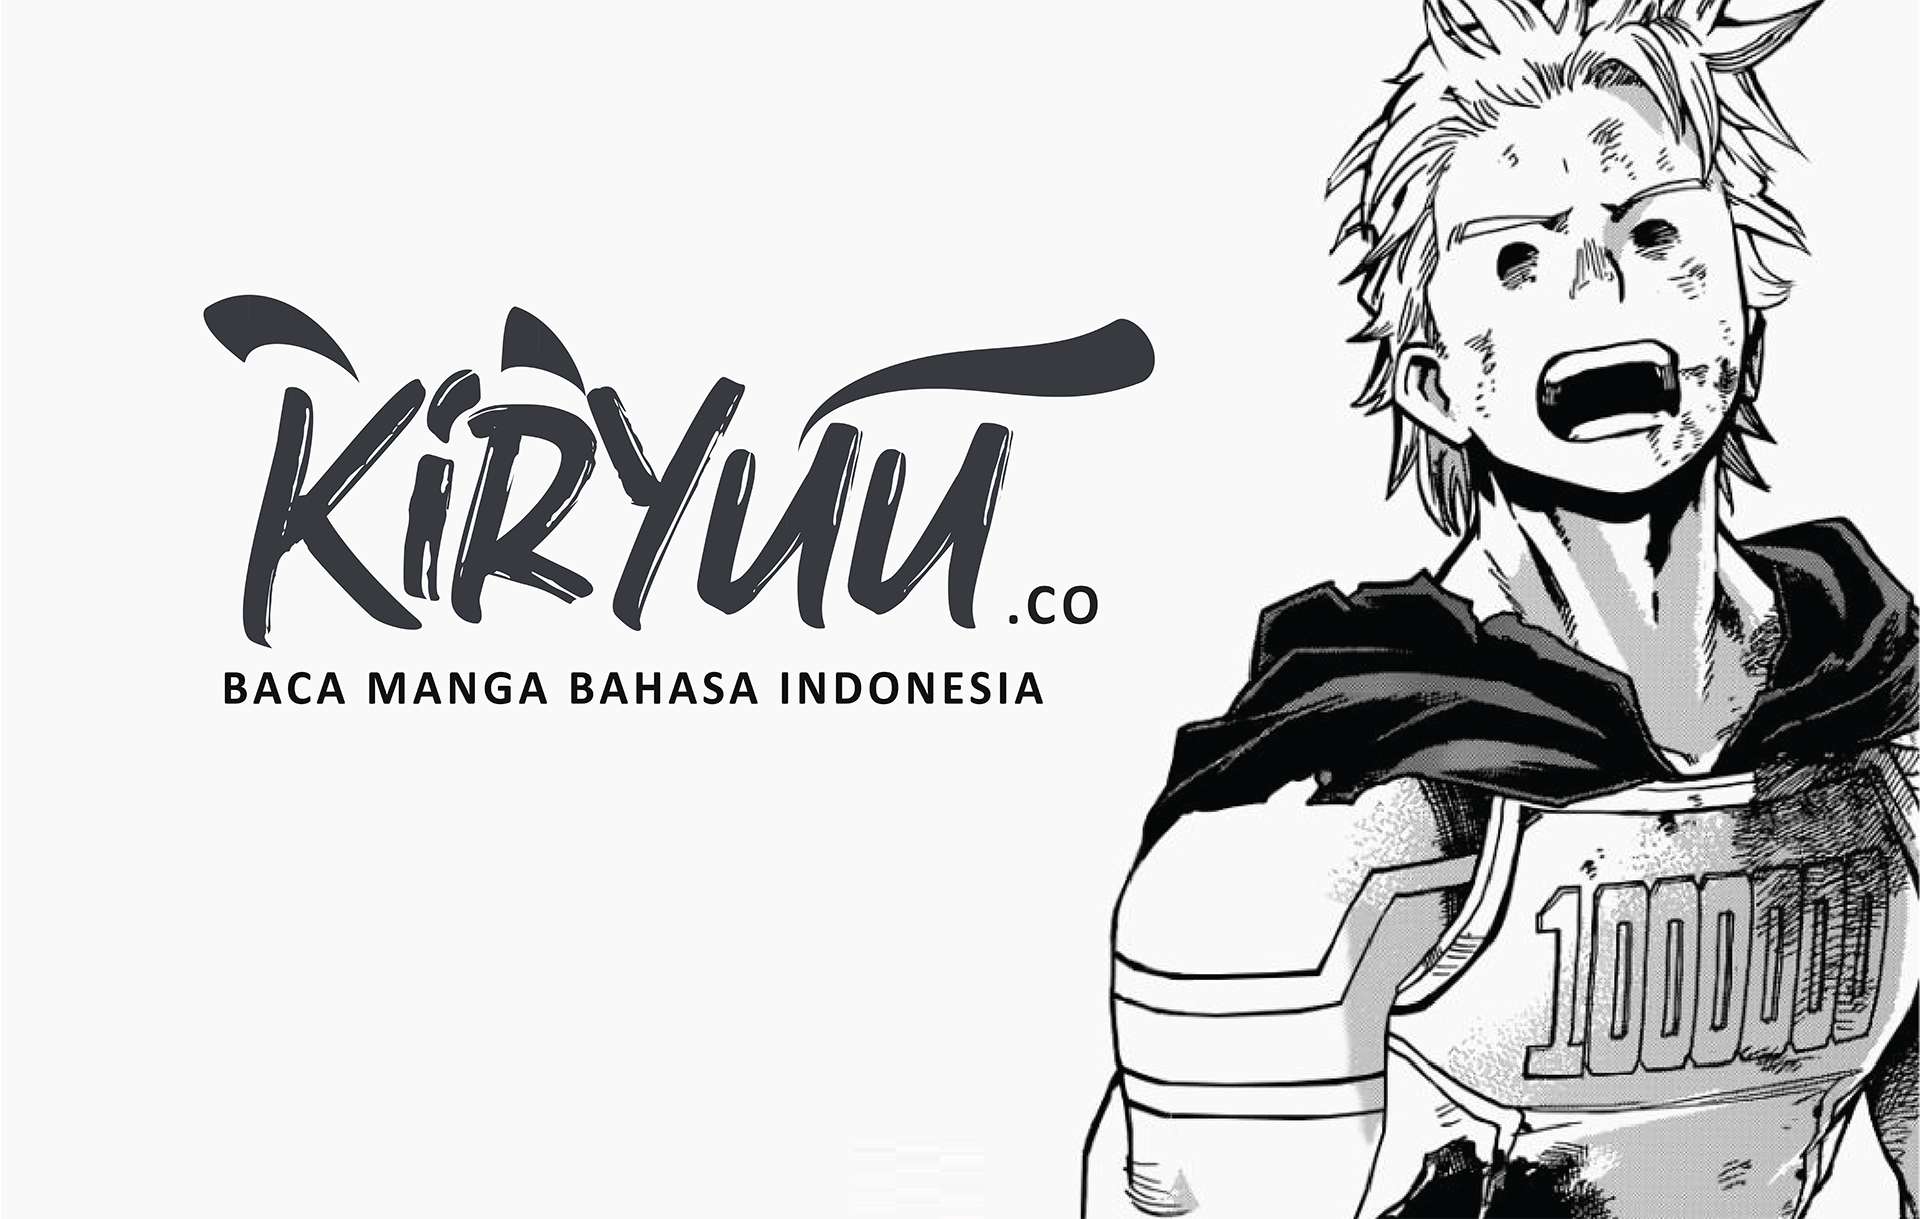 Solo Leveling Chapter 101 Bahasa Indonesia